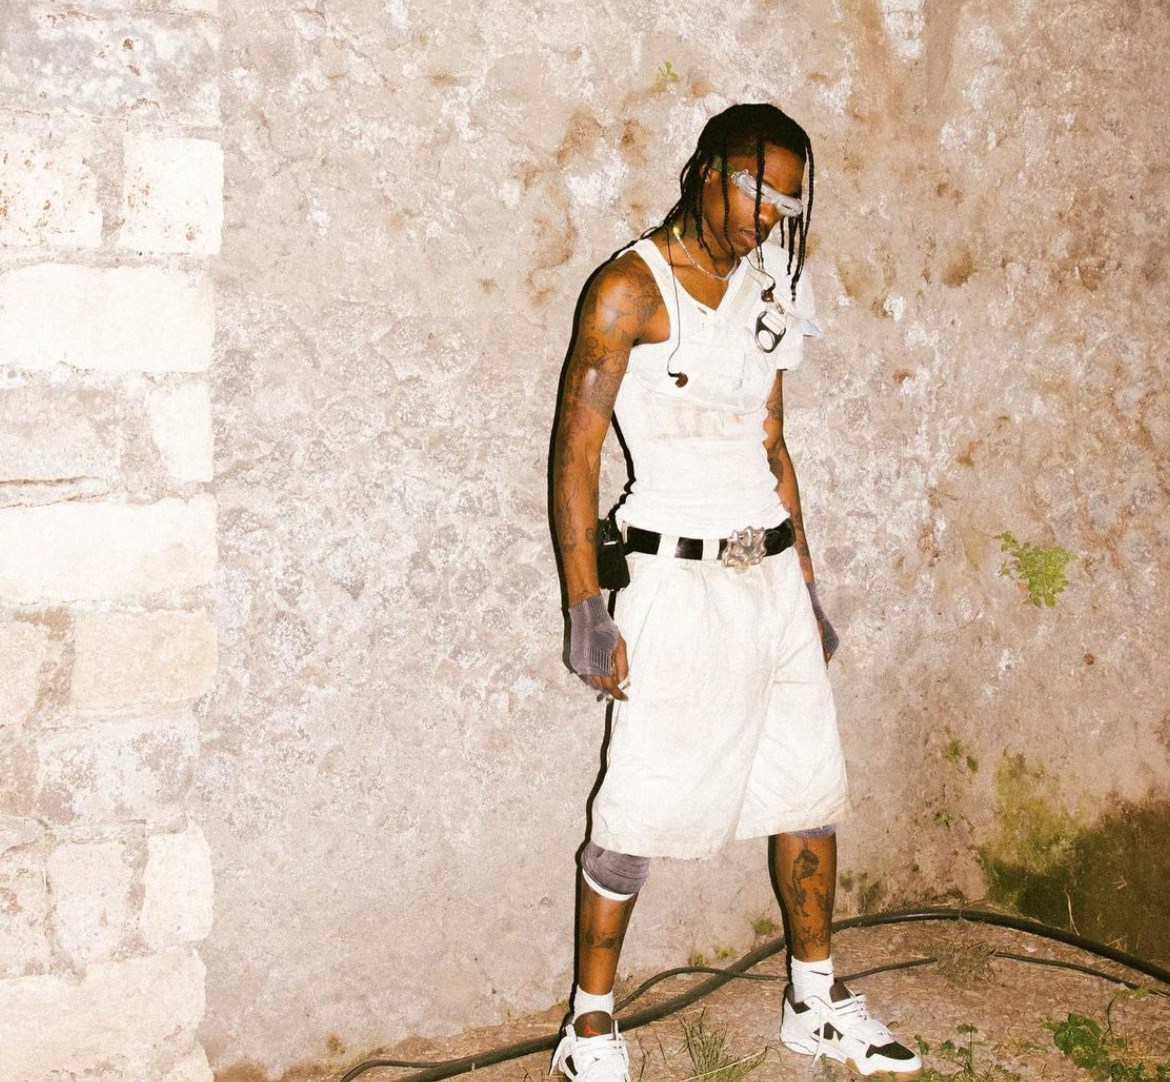 Everything you need to know before Travis Scott's concert in Vancouver this week